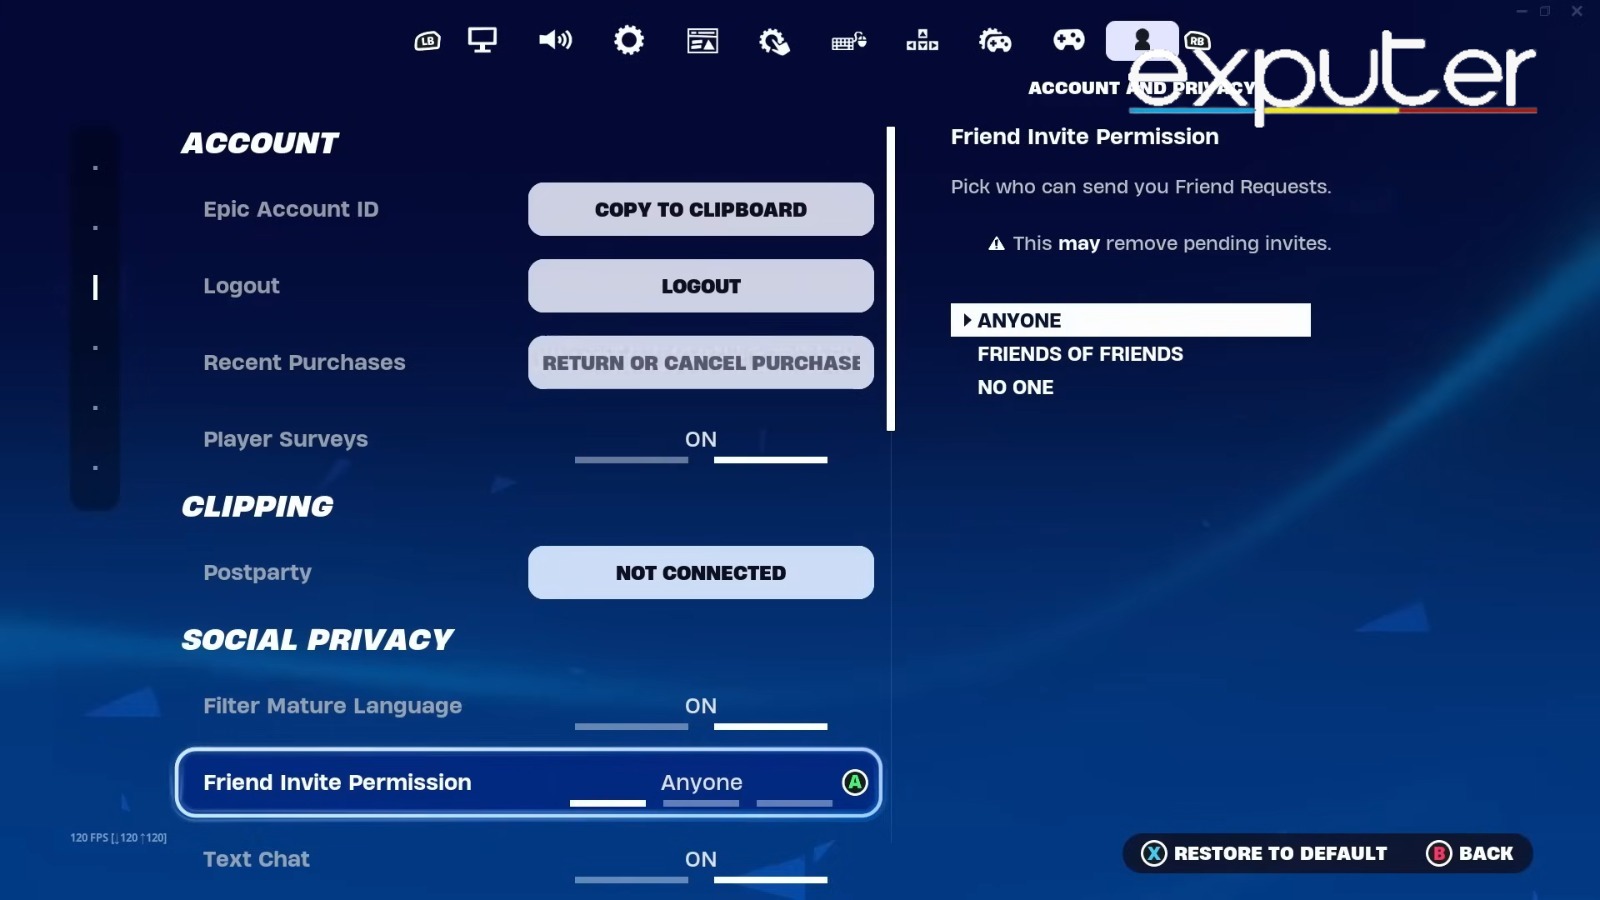 How to get bot lobbies in Fortnite